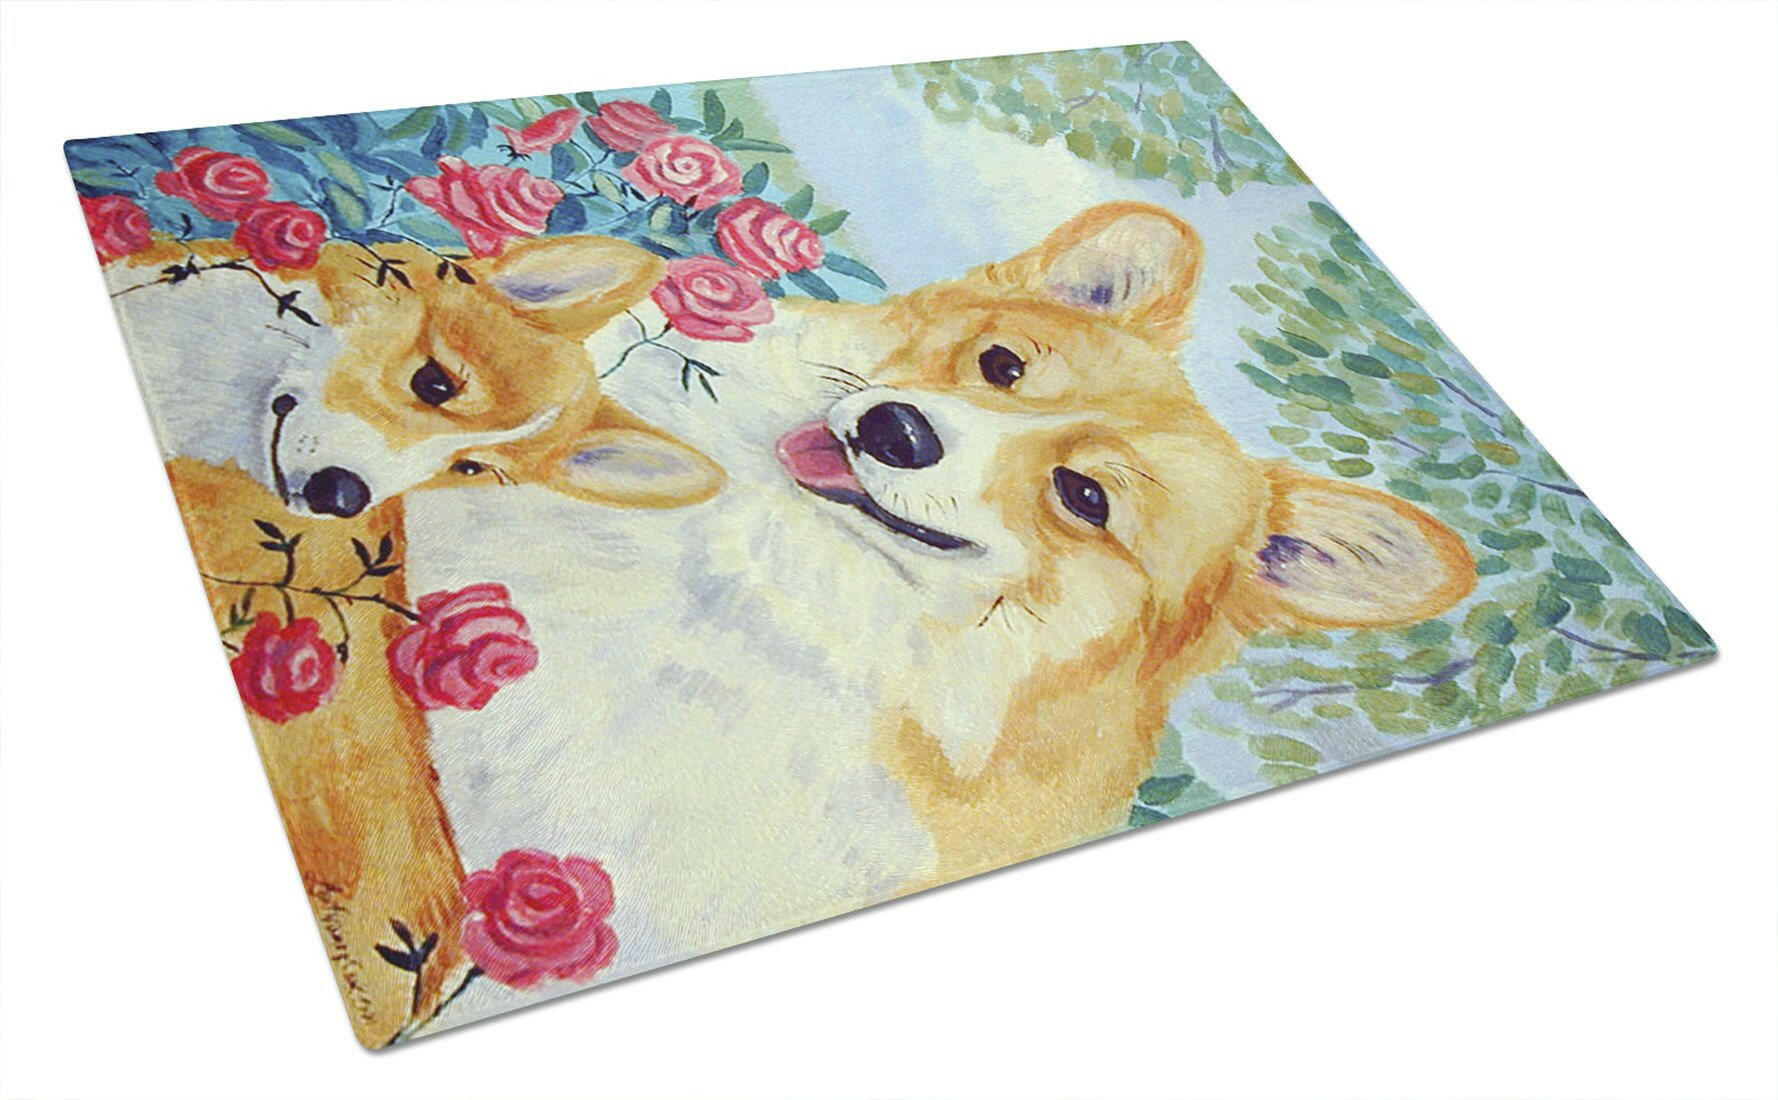 Corgi Momma's Love and Roses Glass Cutting Board Large by Caroline's Treasures